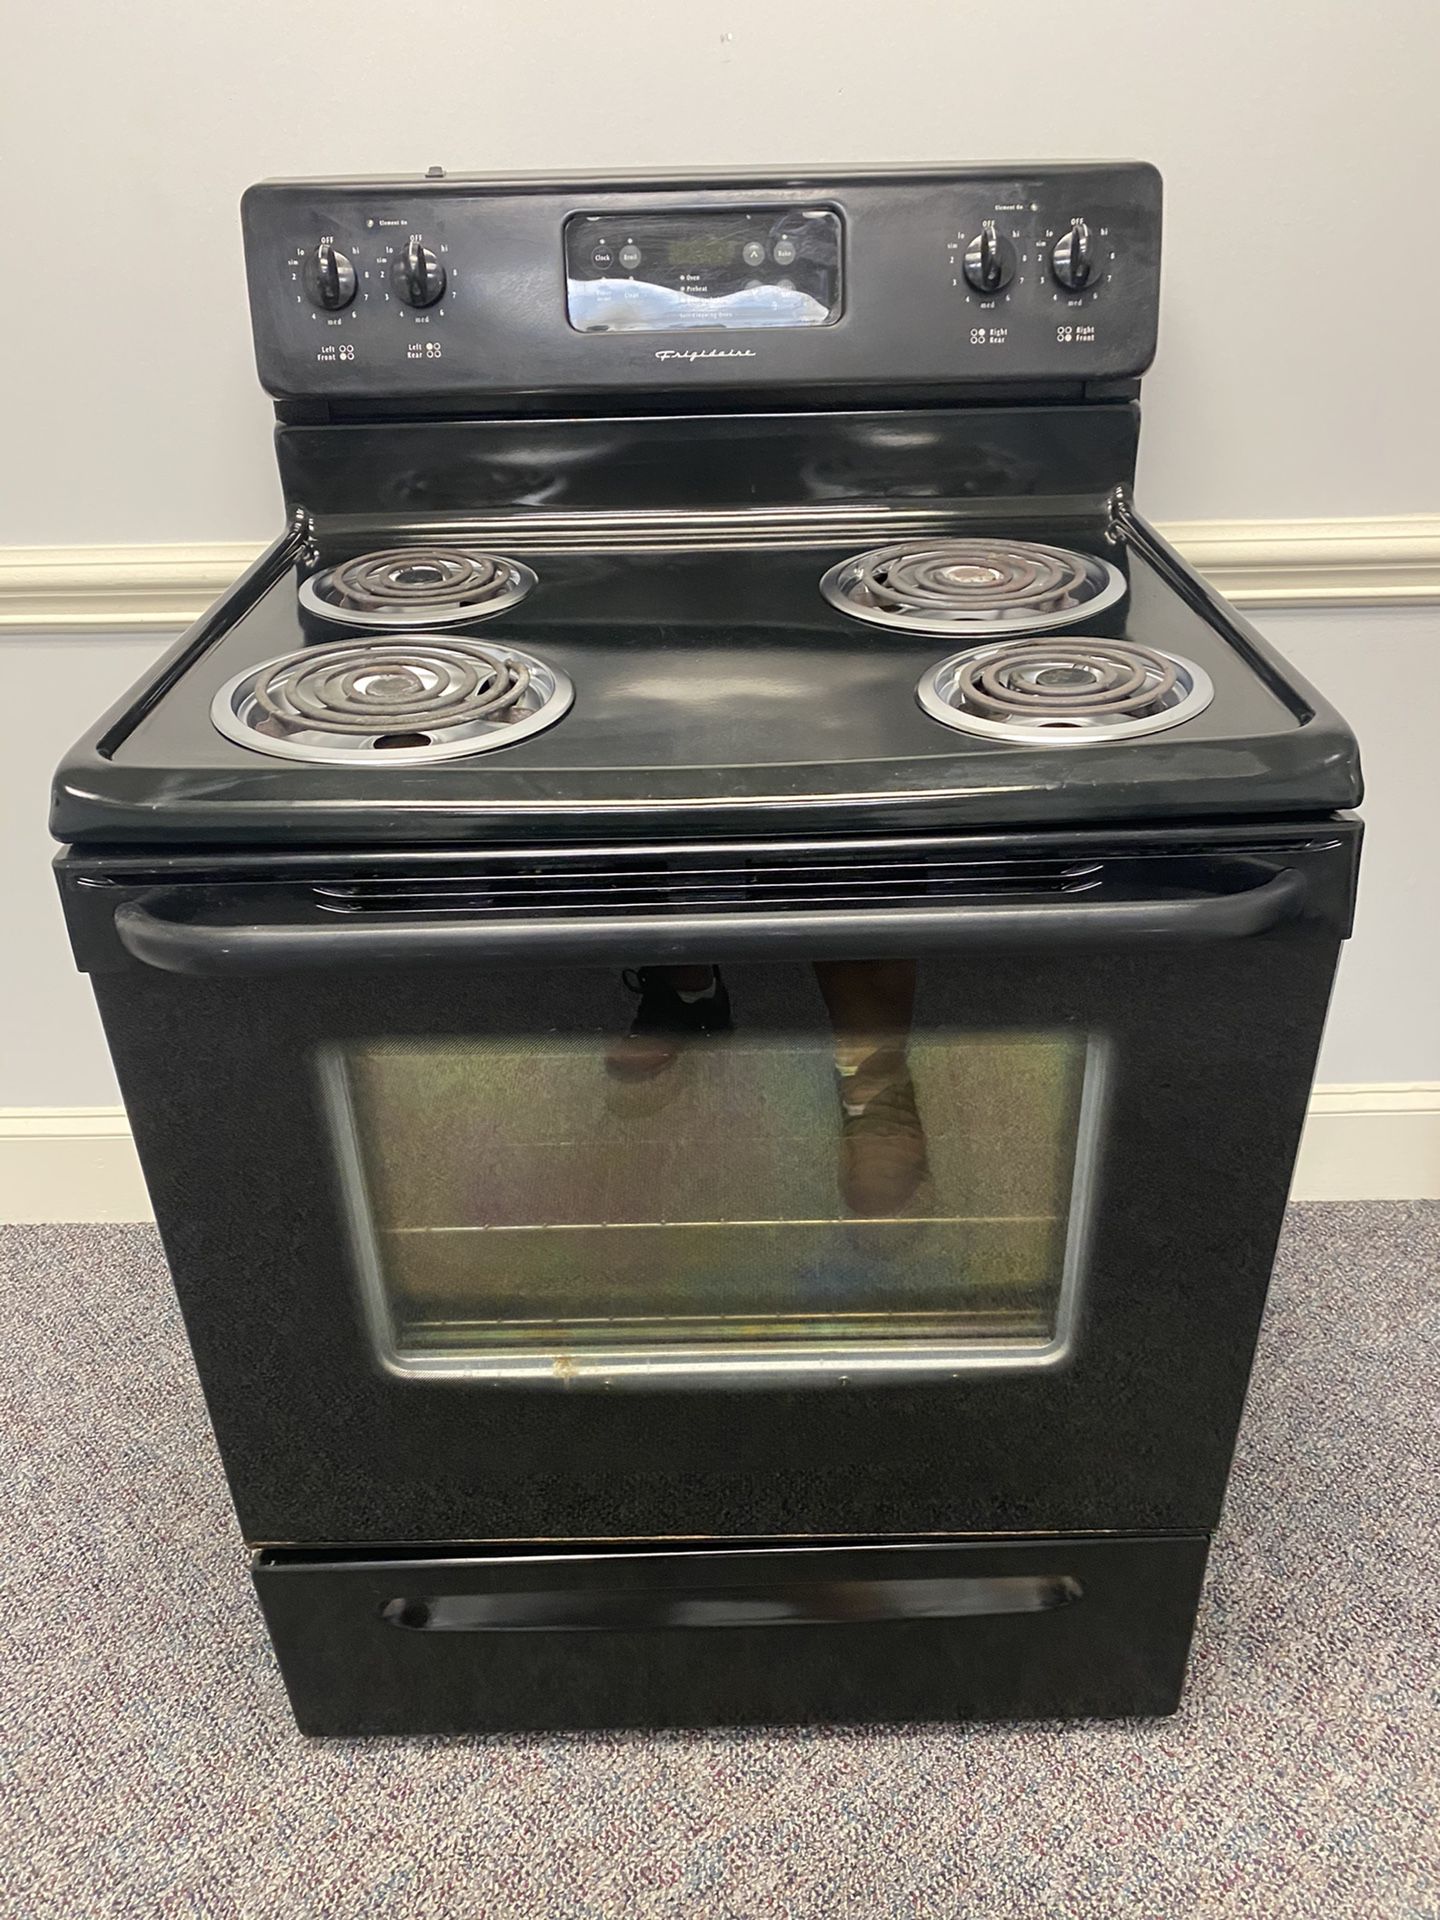 Black Frigidaire coil top stove with 4 MONTH WARRANTY